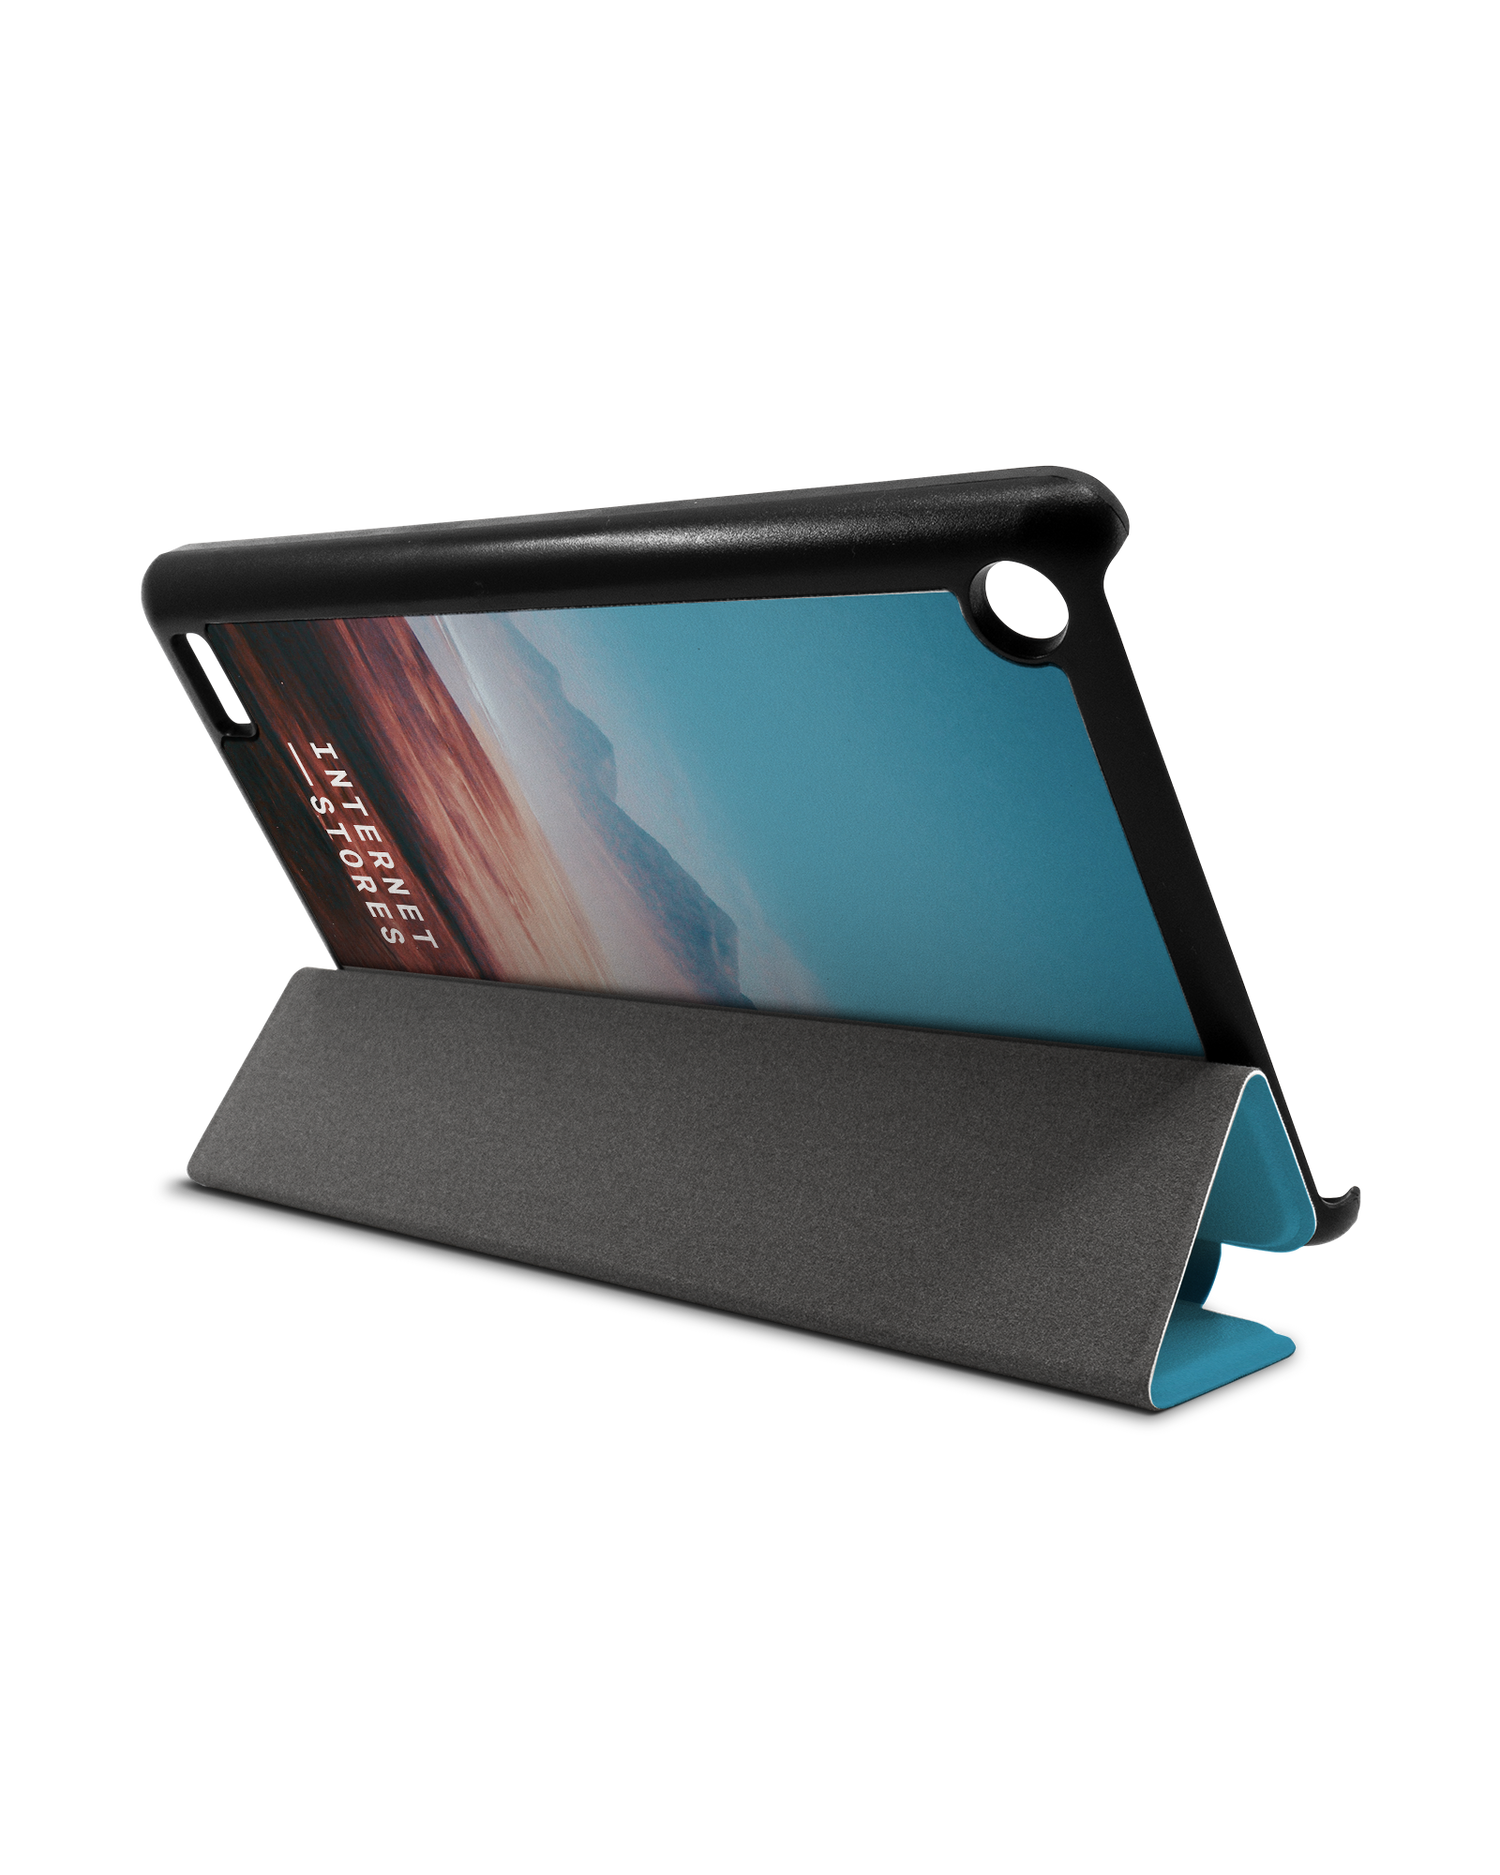 Sky Tablet Smart Case for Amazon Fire 7: Used as Stand